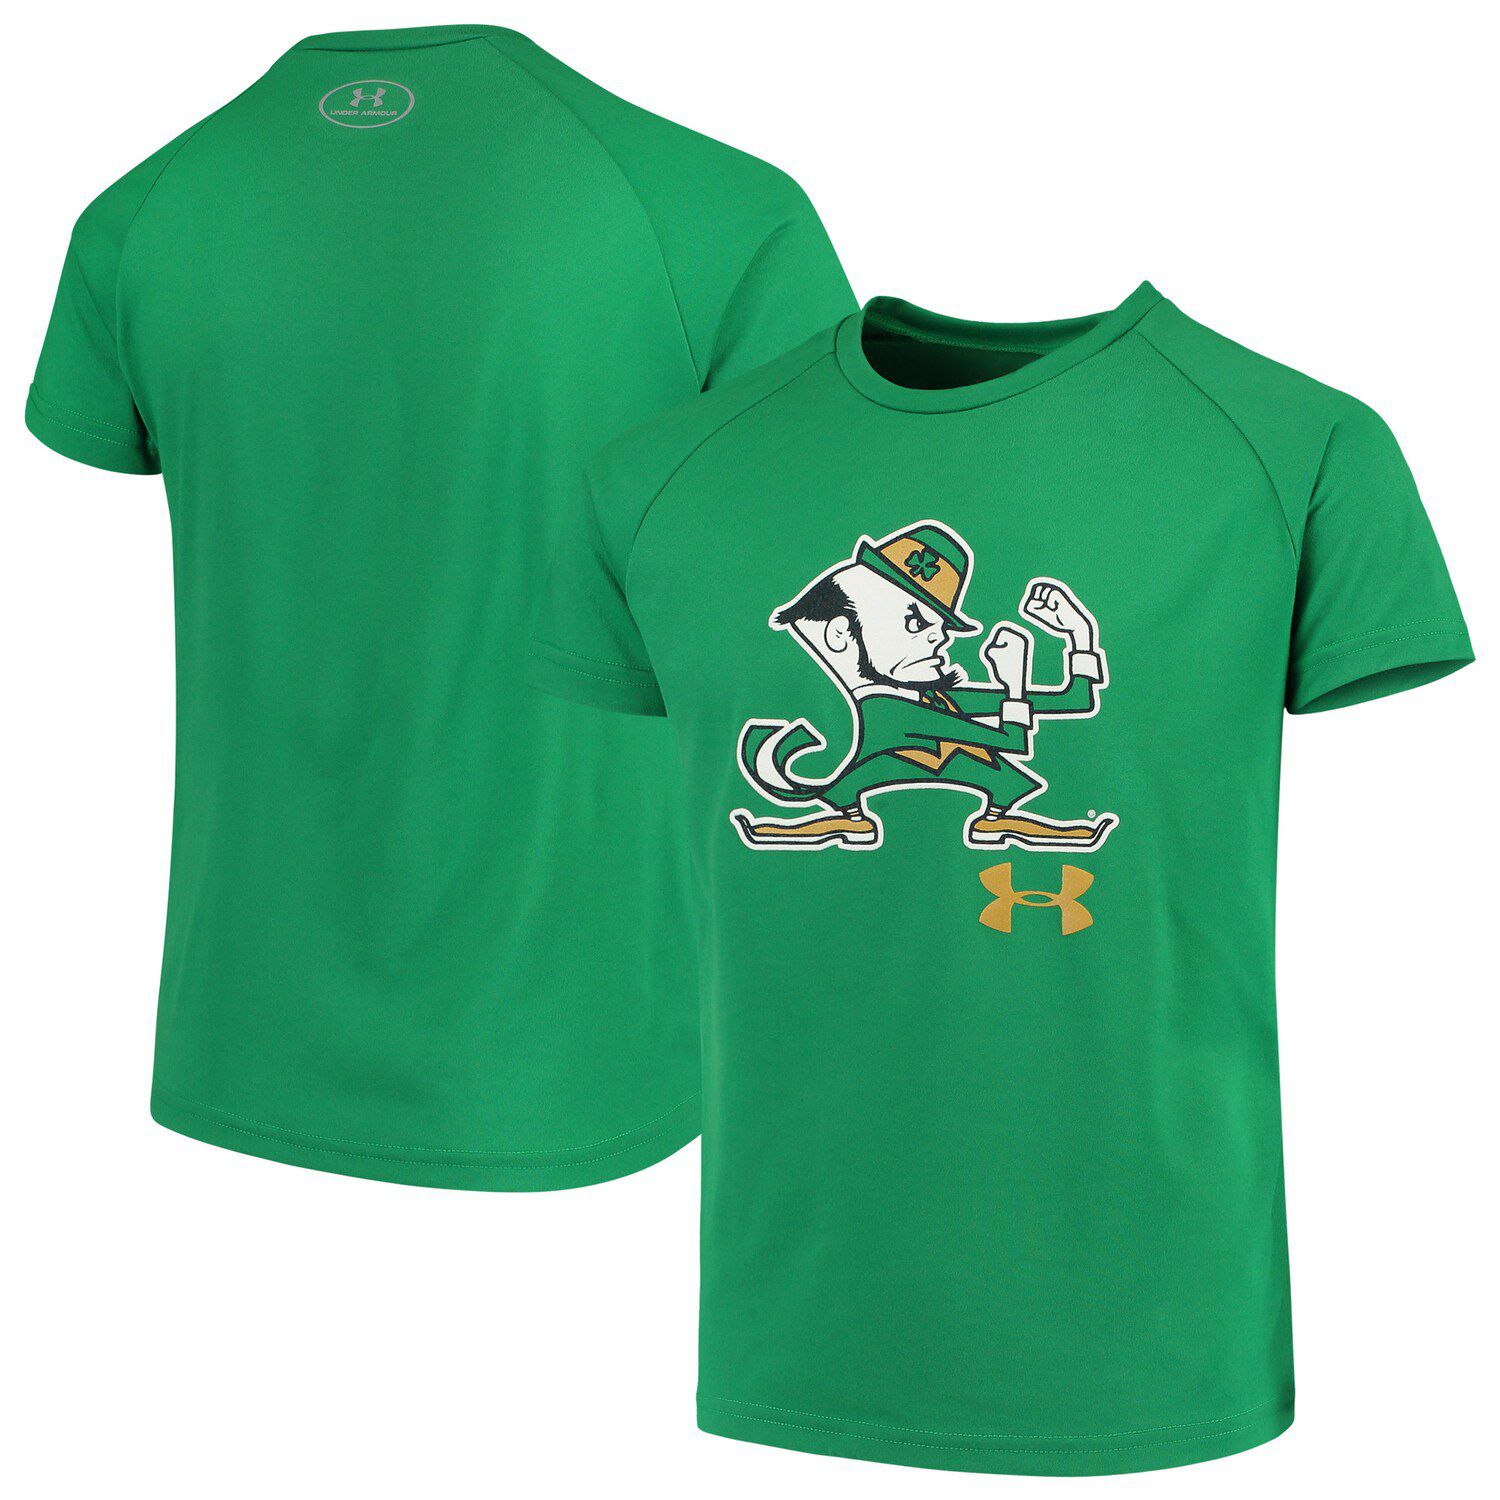 green under armour shirt youth